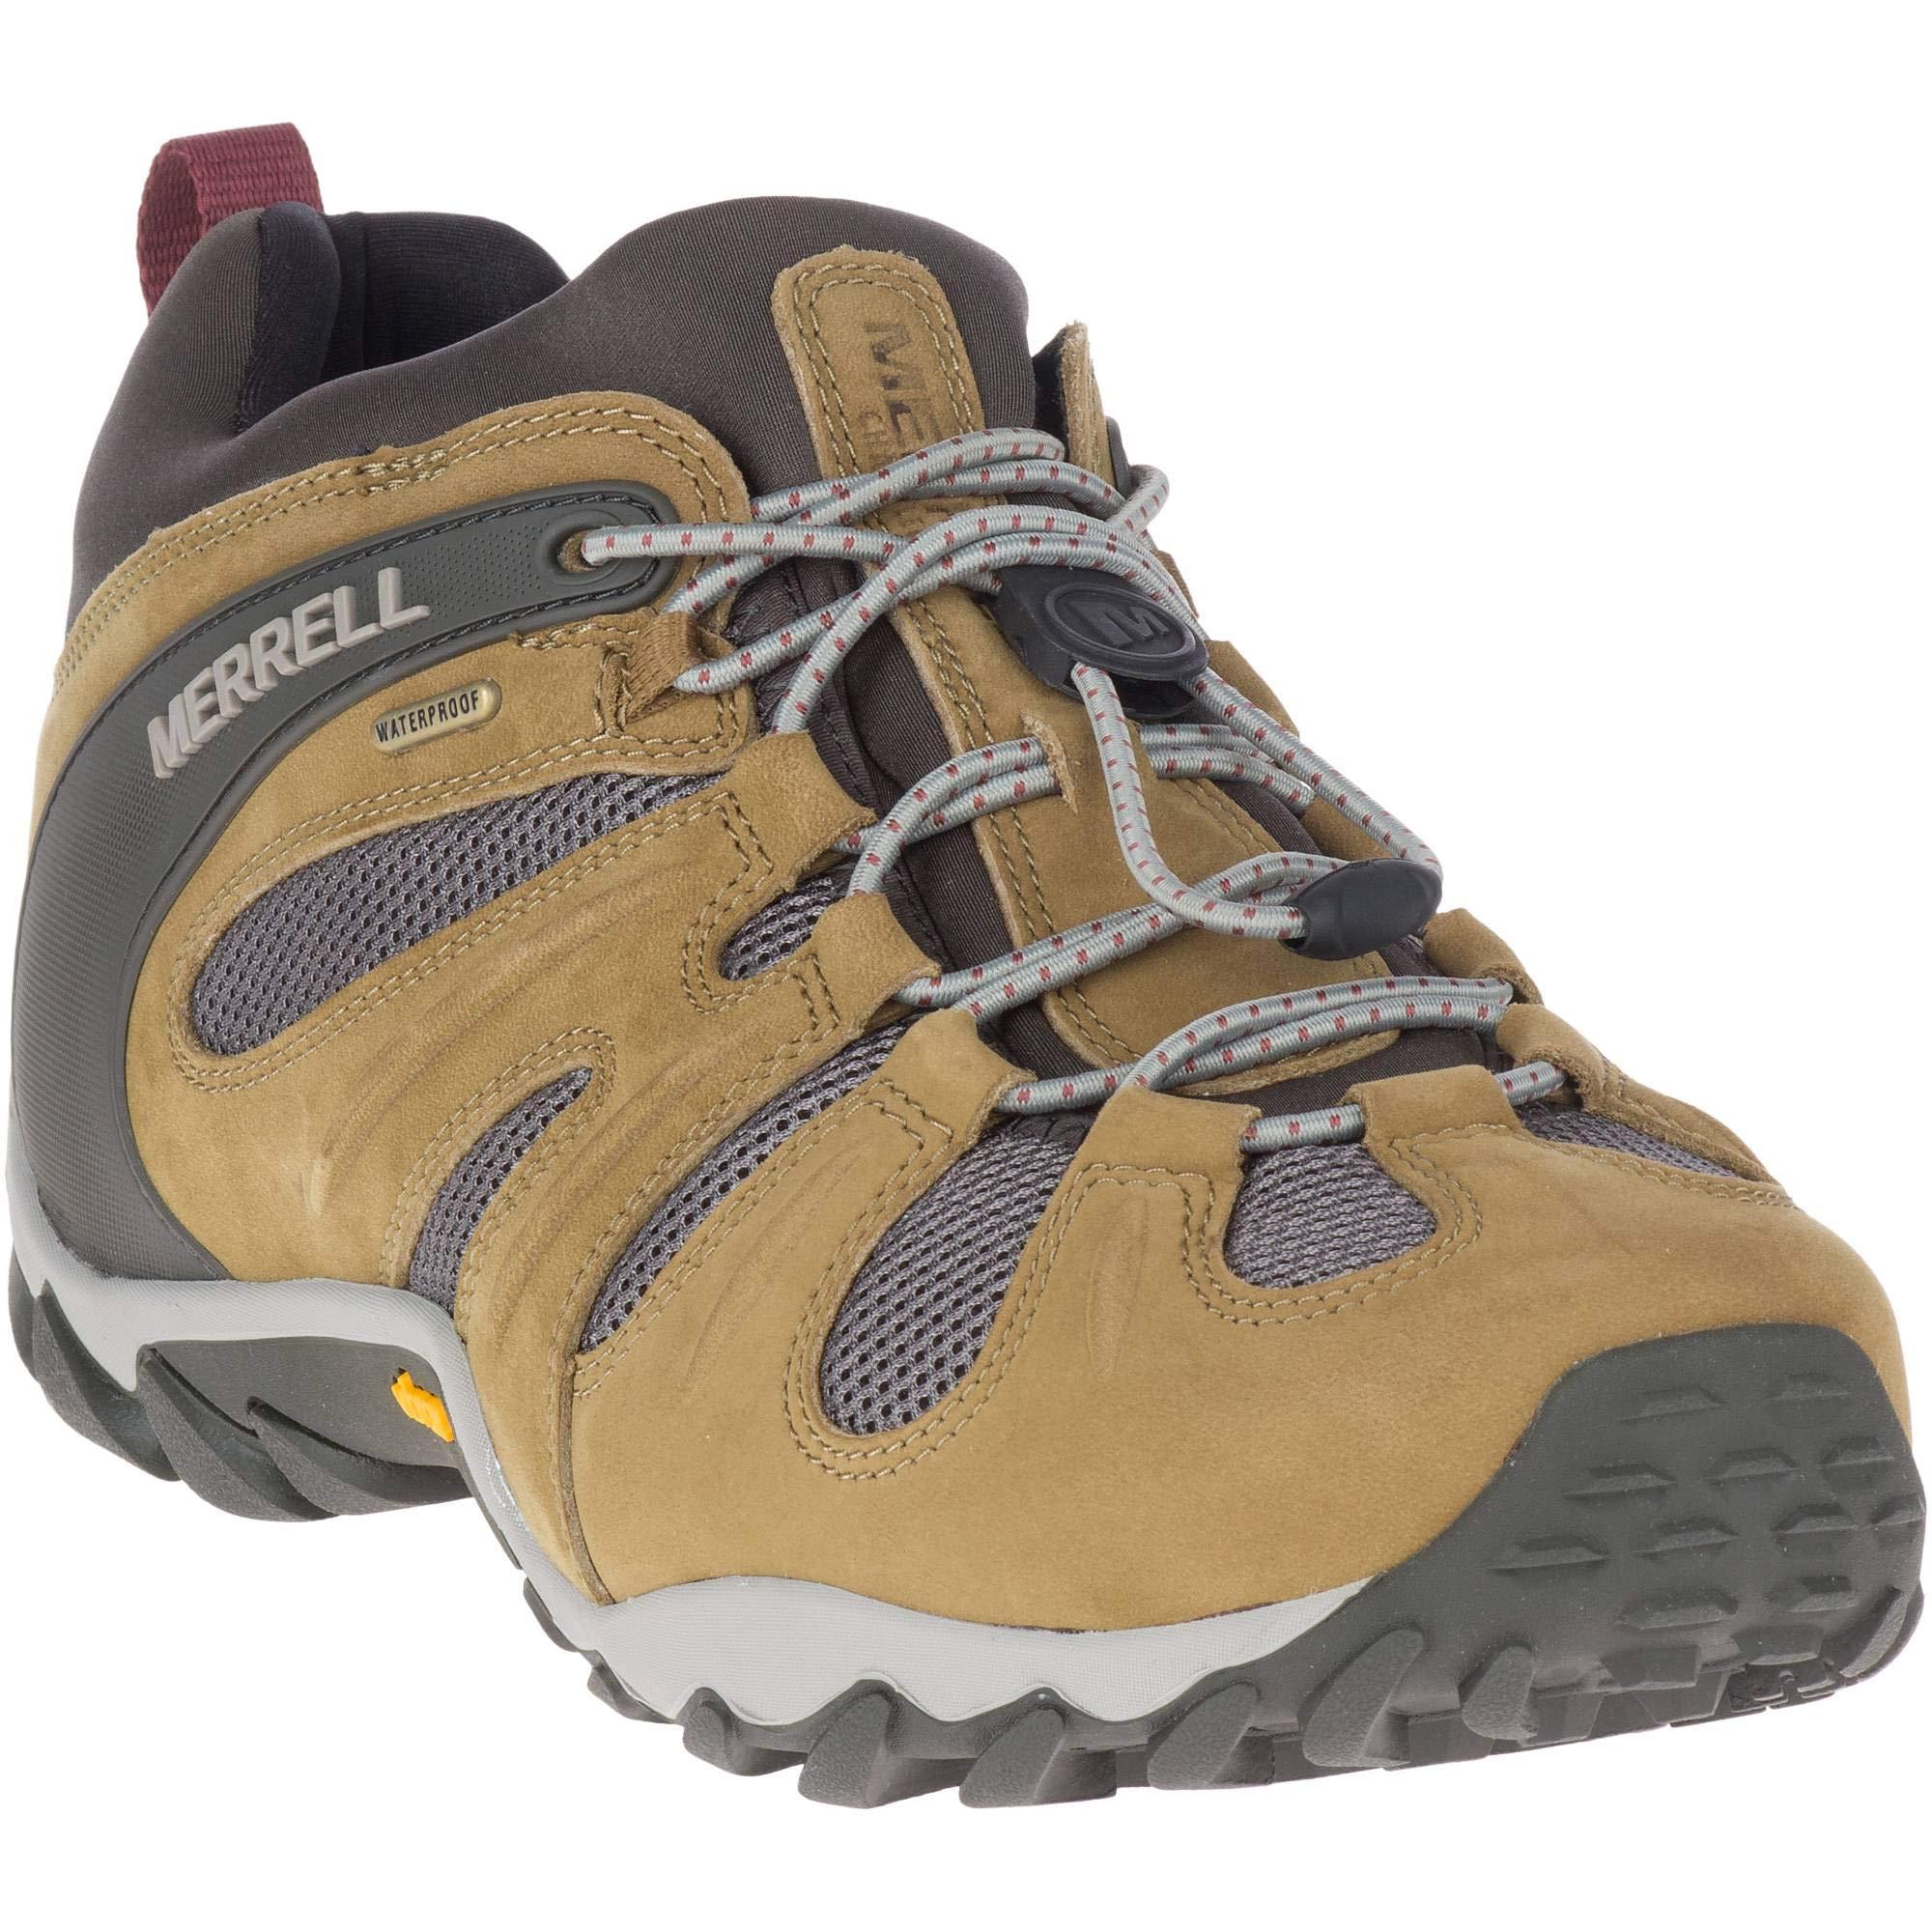 Merrell Leather Cham 8 Stretch Wp Hiking Shoe for Men - Lyst